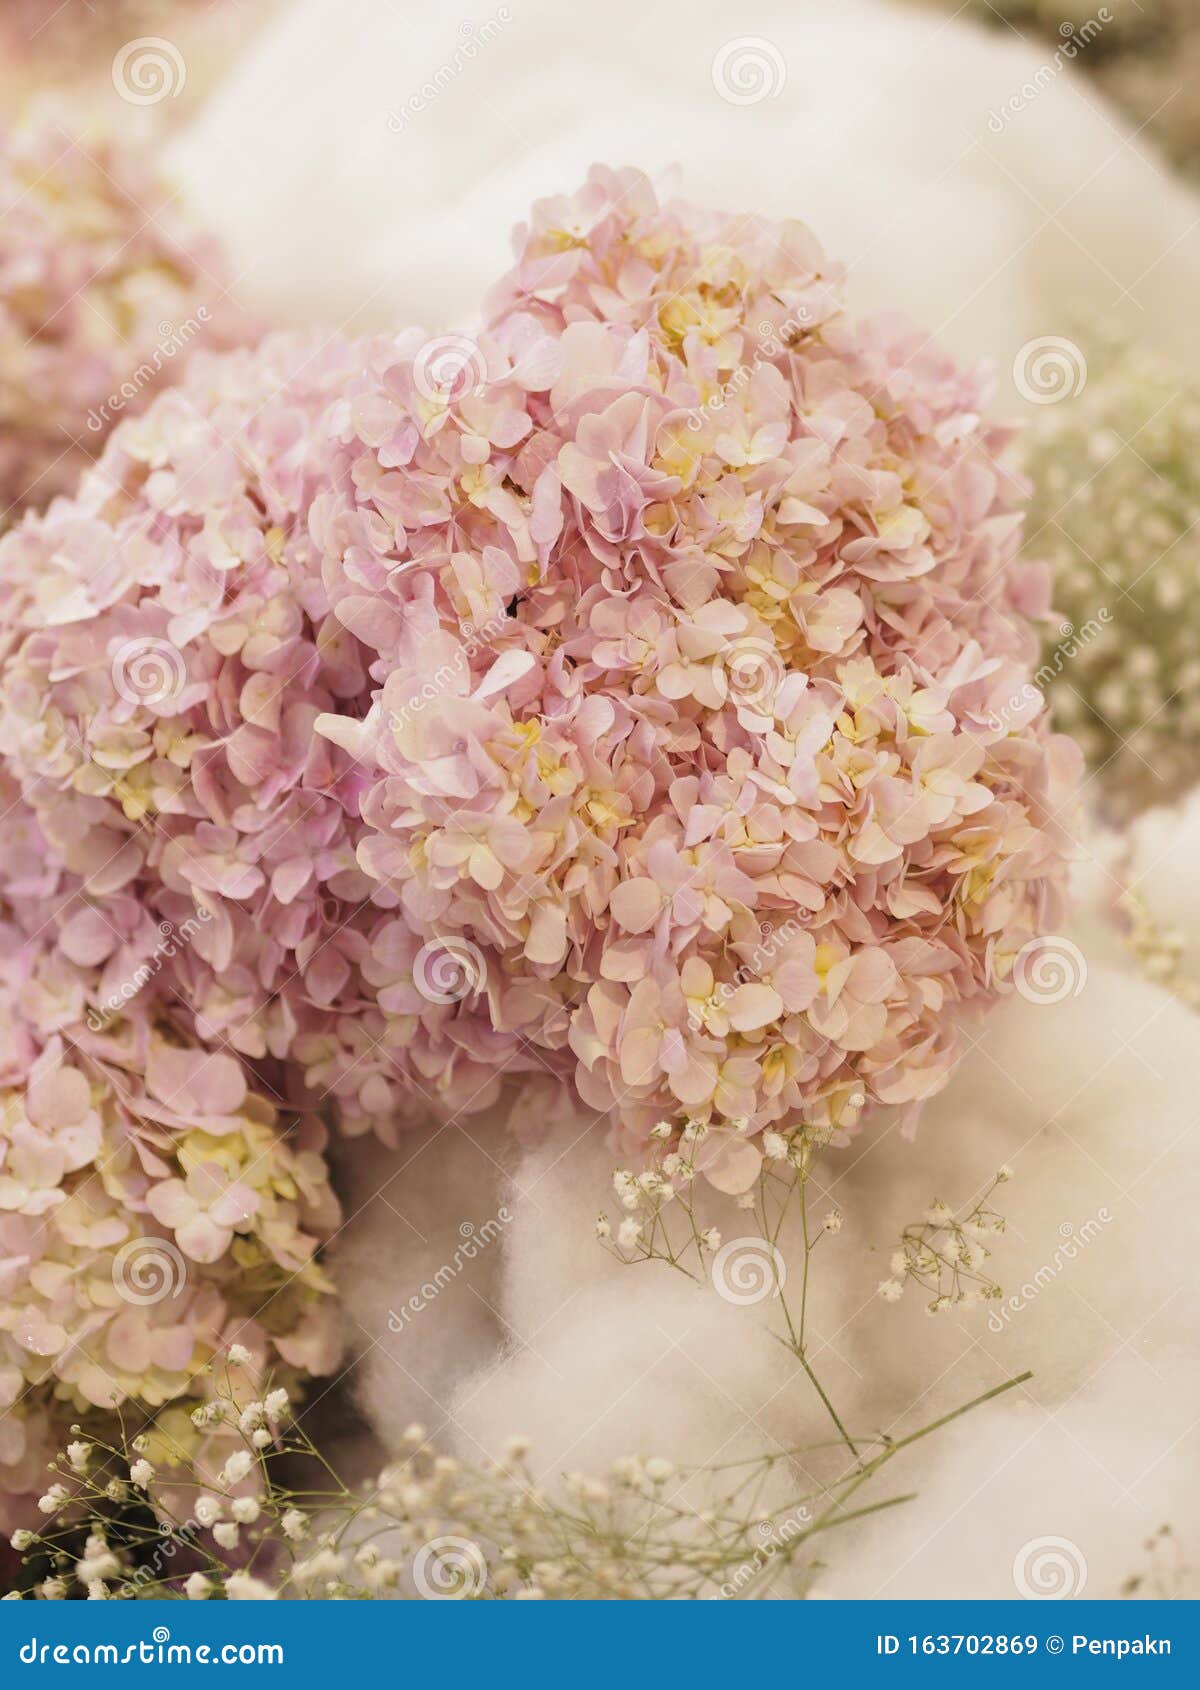 Hydrangea Or Ajisai Pink Flower On Blurred Of Nature Background Stock Image Image Of Botany Closeup